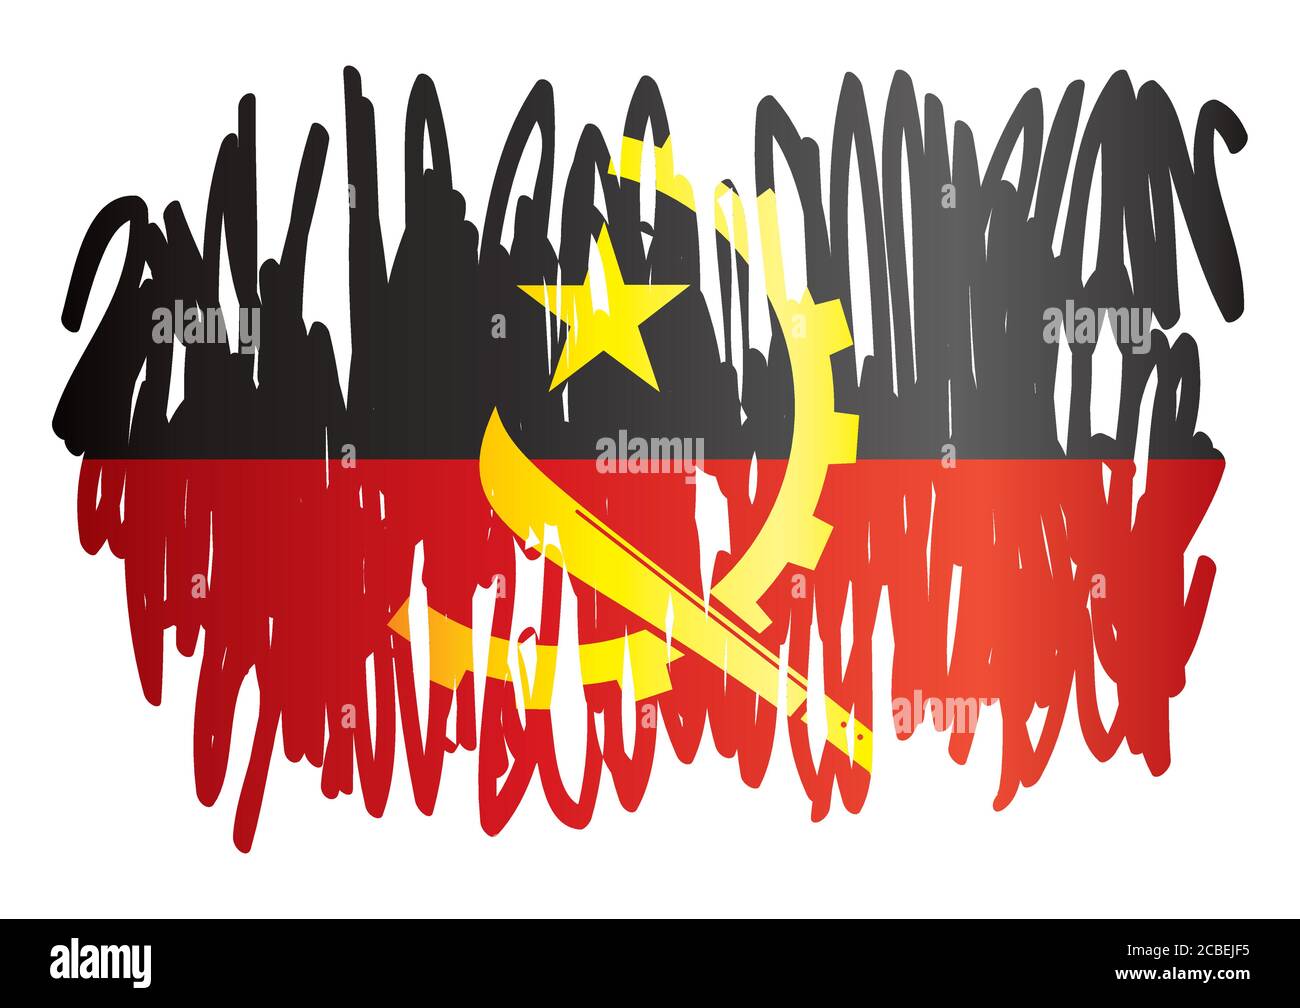 Flag of Angola, Republic of Angola. Template for award design, an official document with the flag of Angola. Bright, colorful vector illustration. Stock Vector